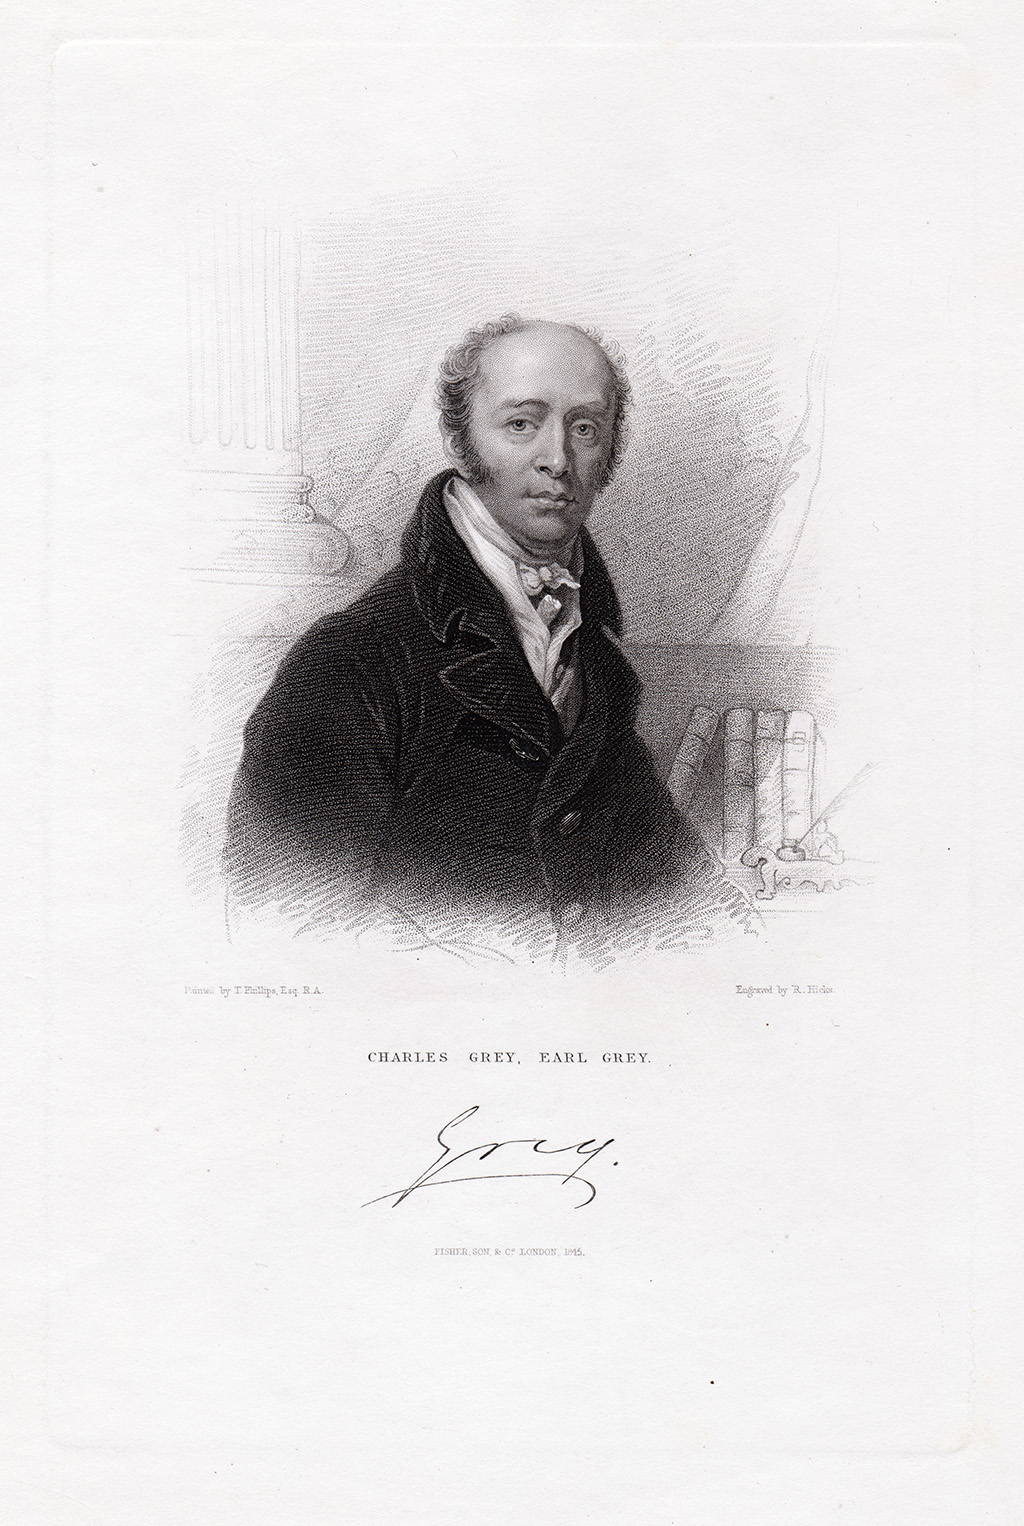 T. Phillips, Earl Grey c. 1845, engraving in the crayon manner, 13.5 x 11cm. 